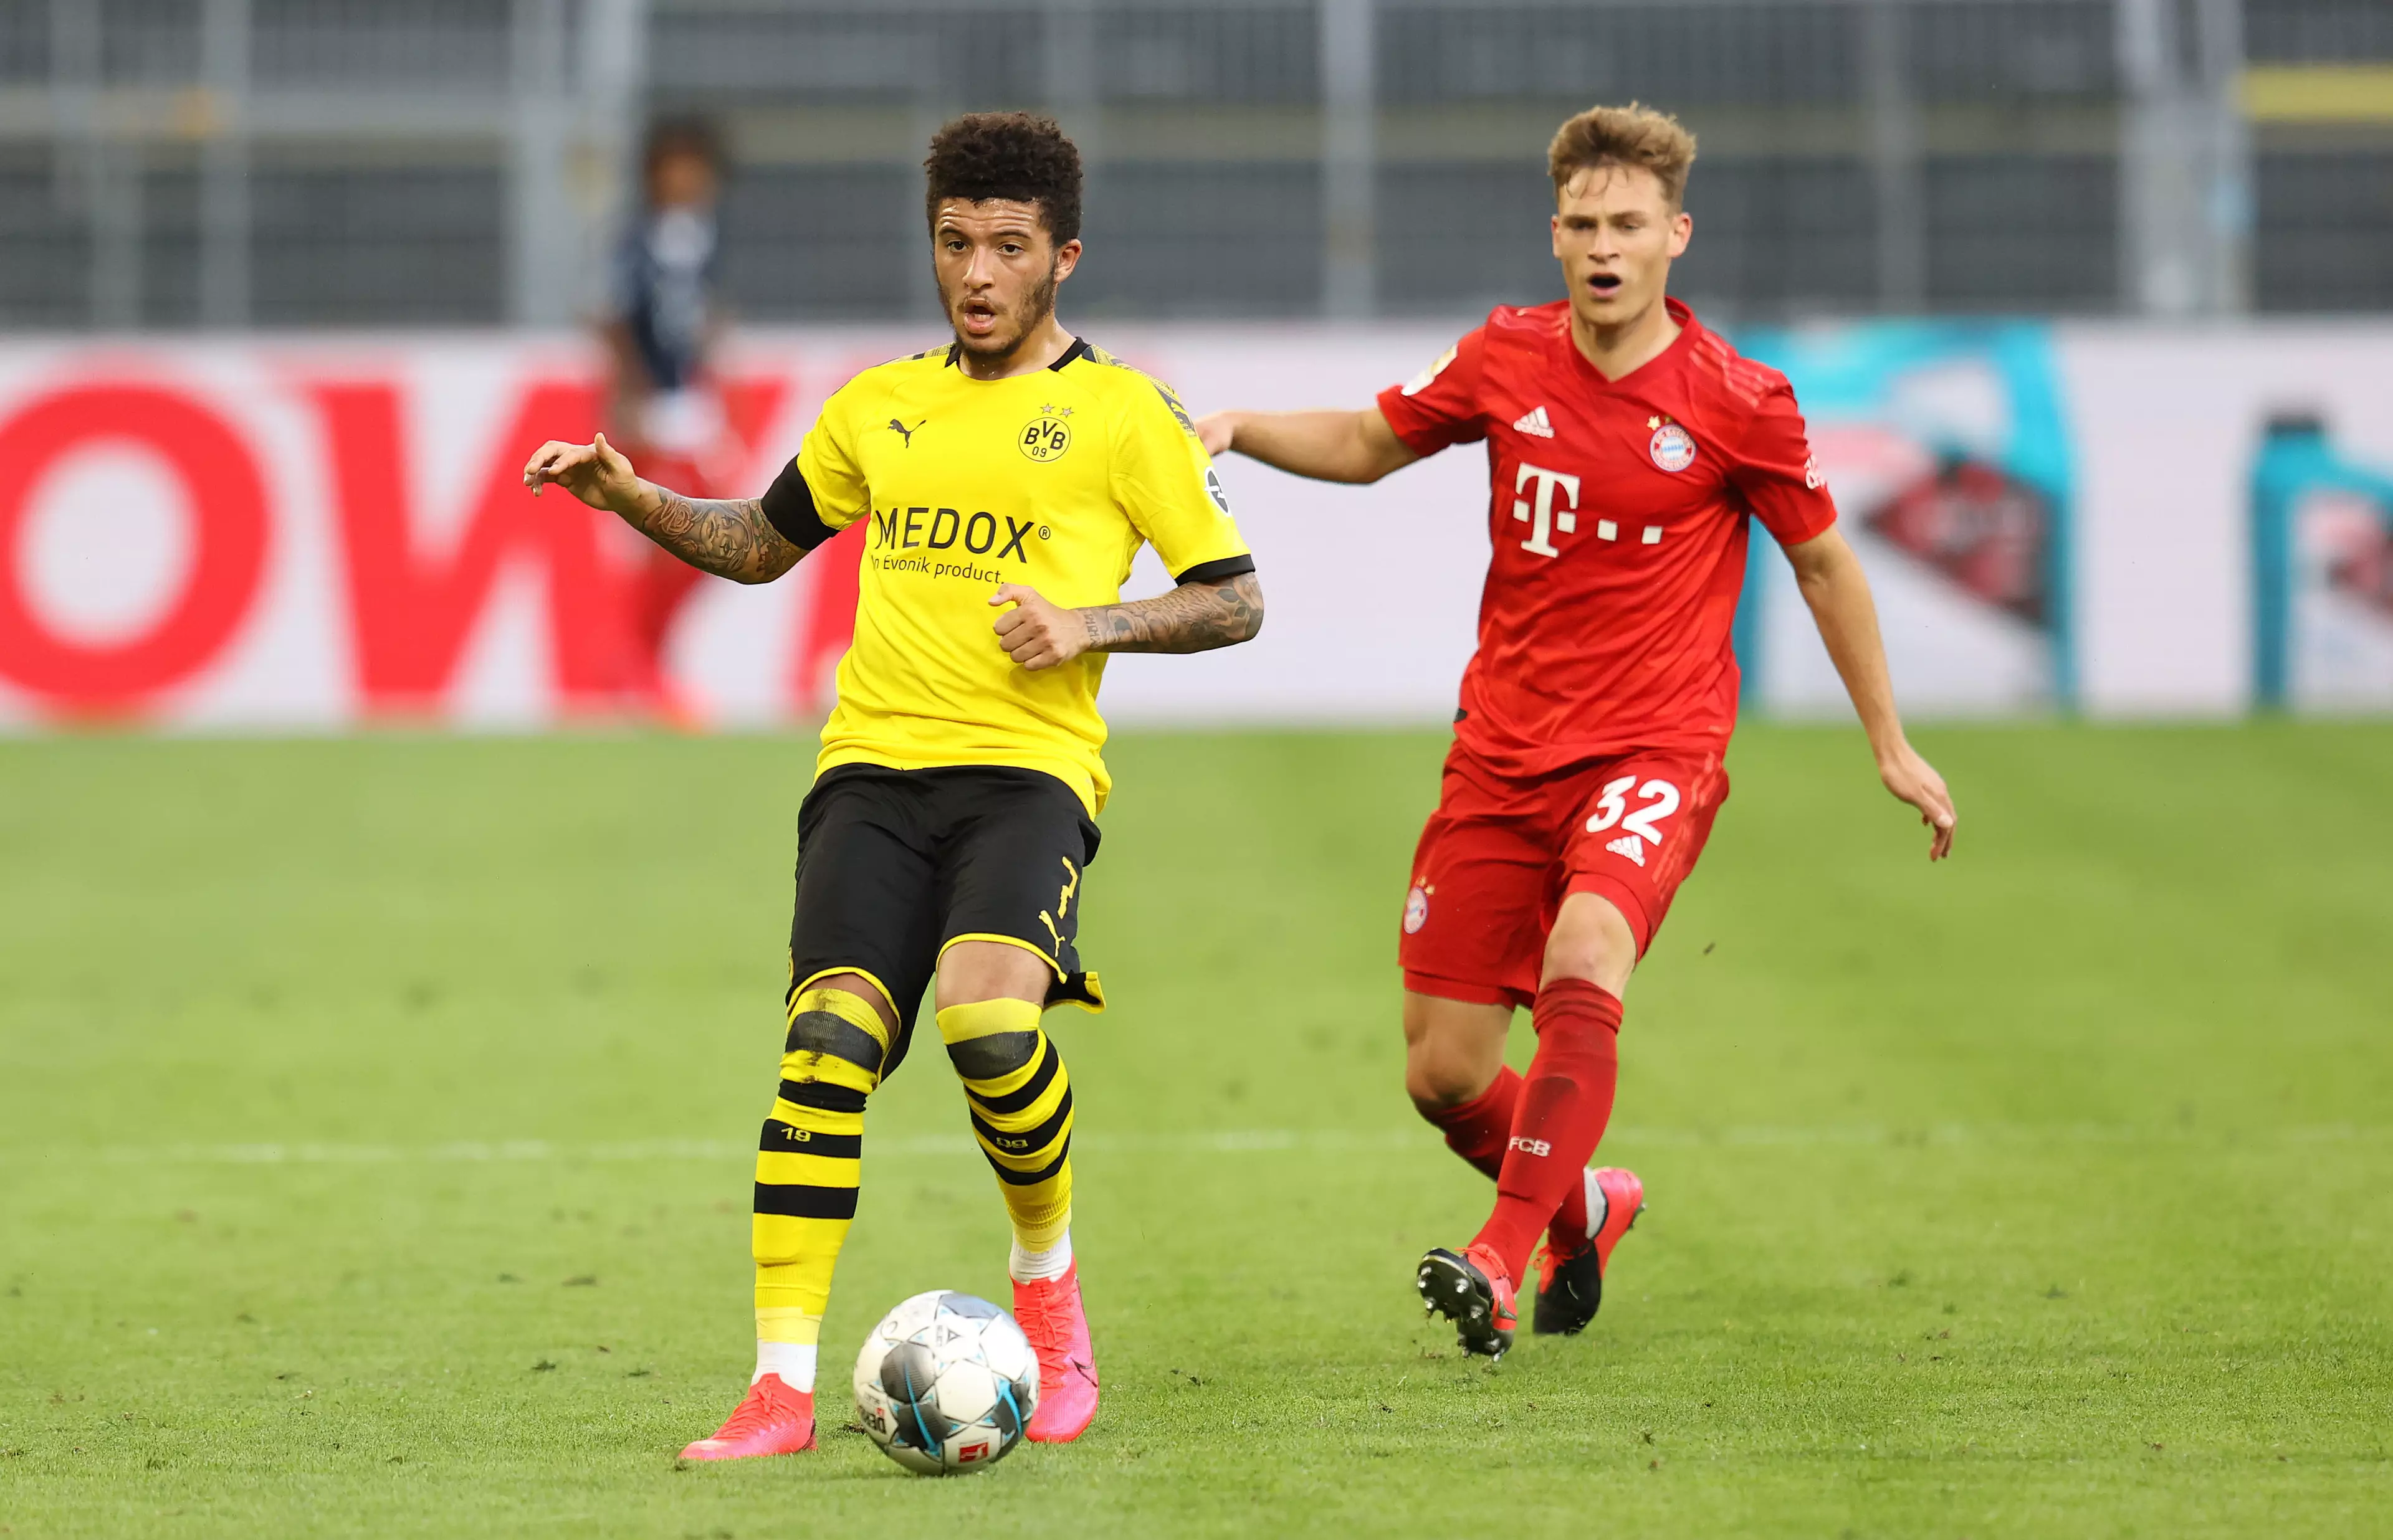 Sancho was a second half substitute for Dortmund against Bayern on Tuesday evening. Image: PA Images